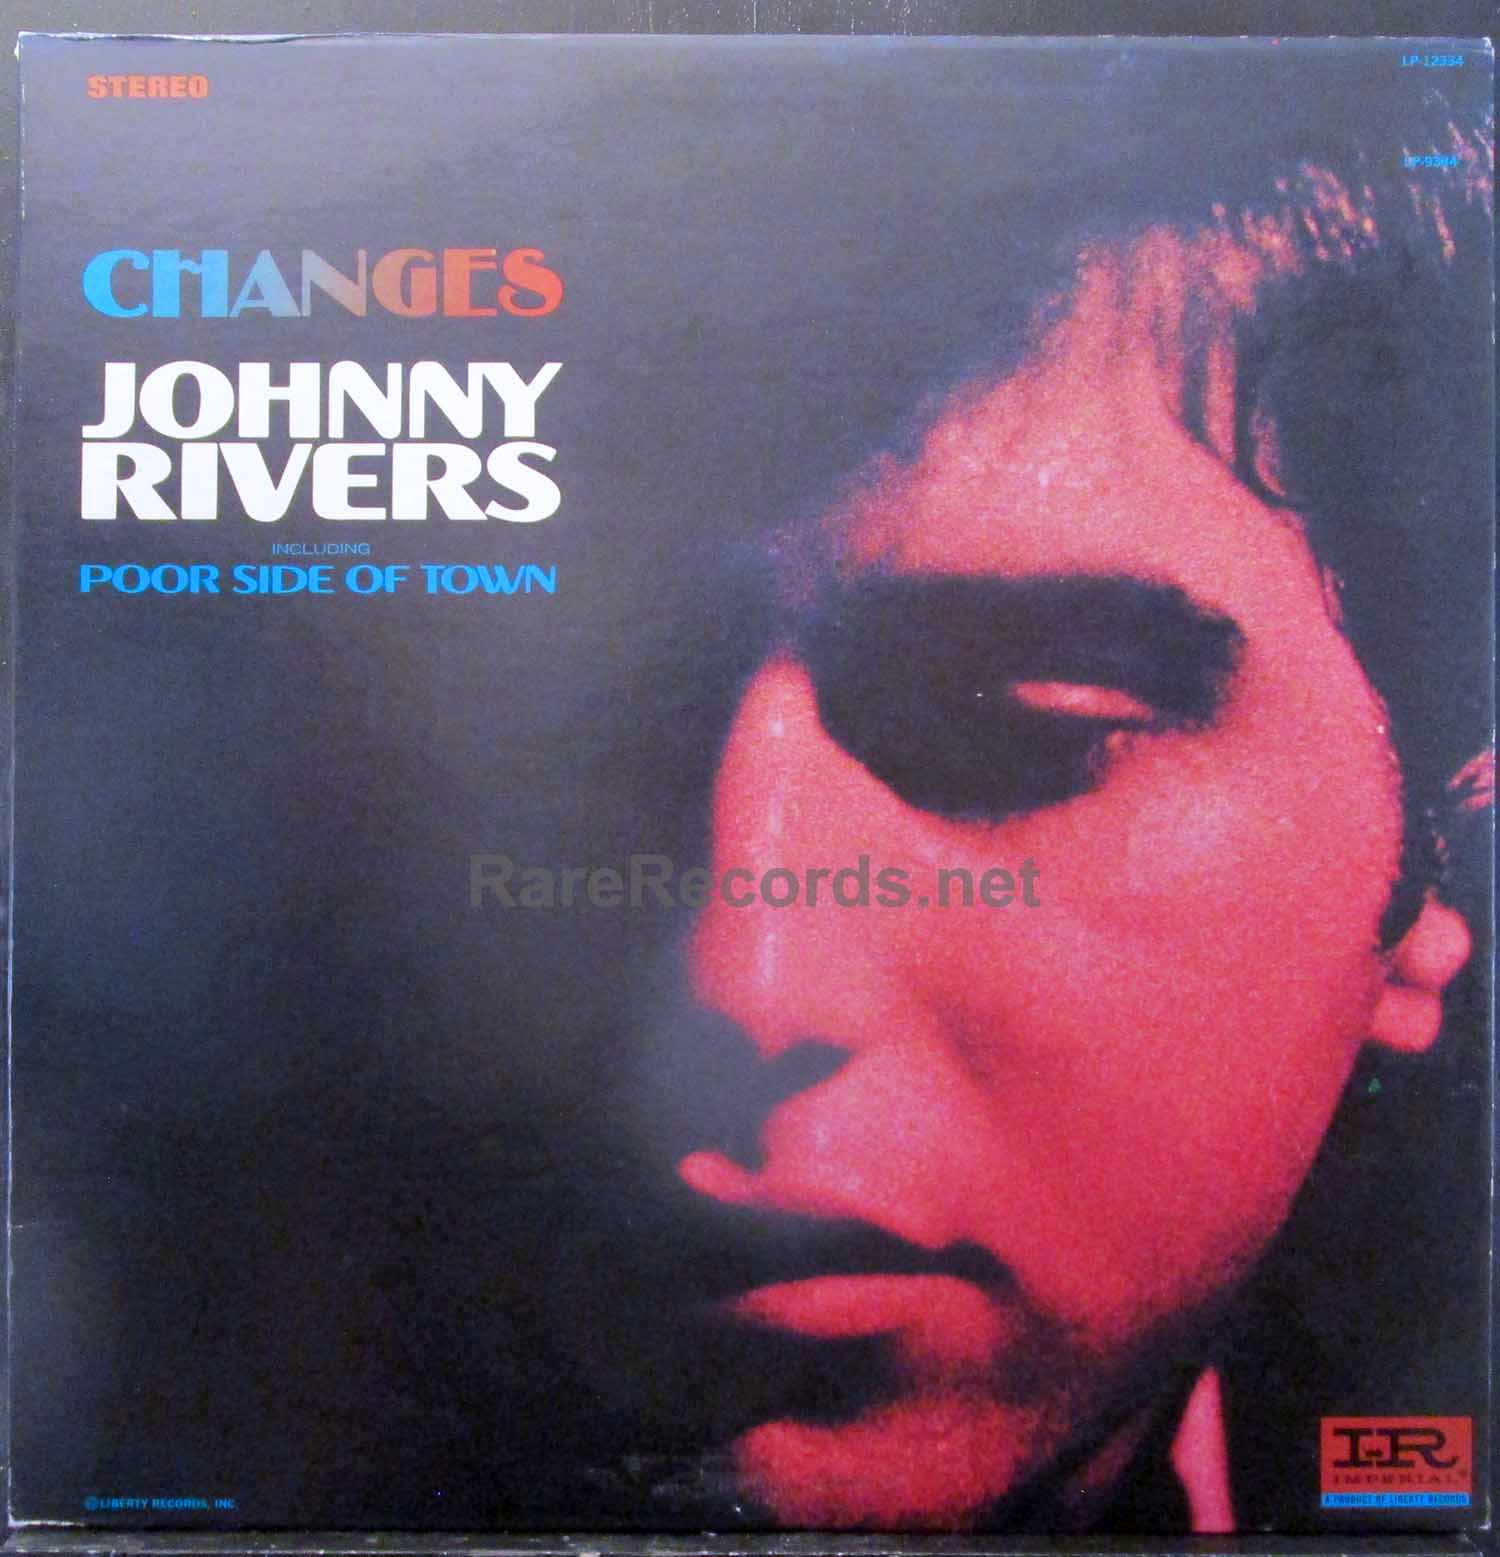 Johnny Rivers - Changes U.S. stereo LP